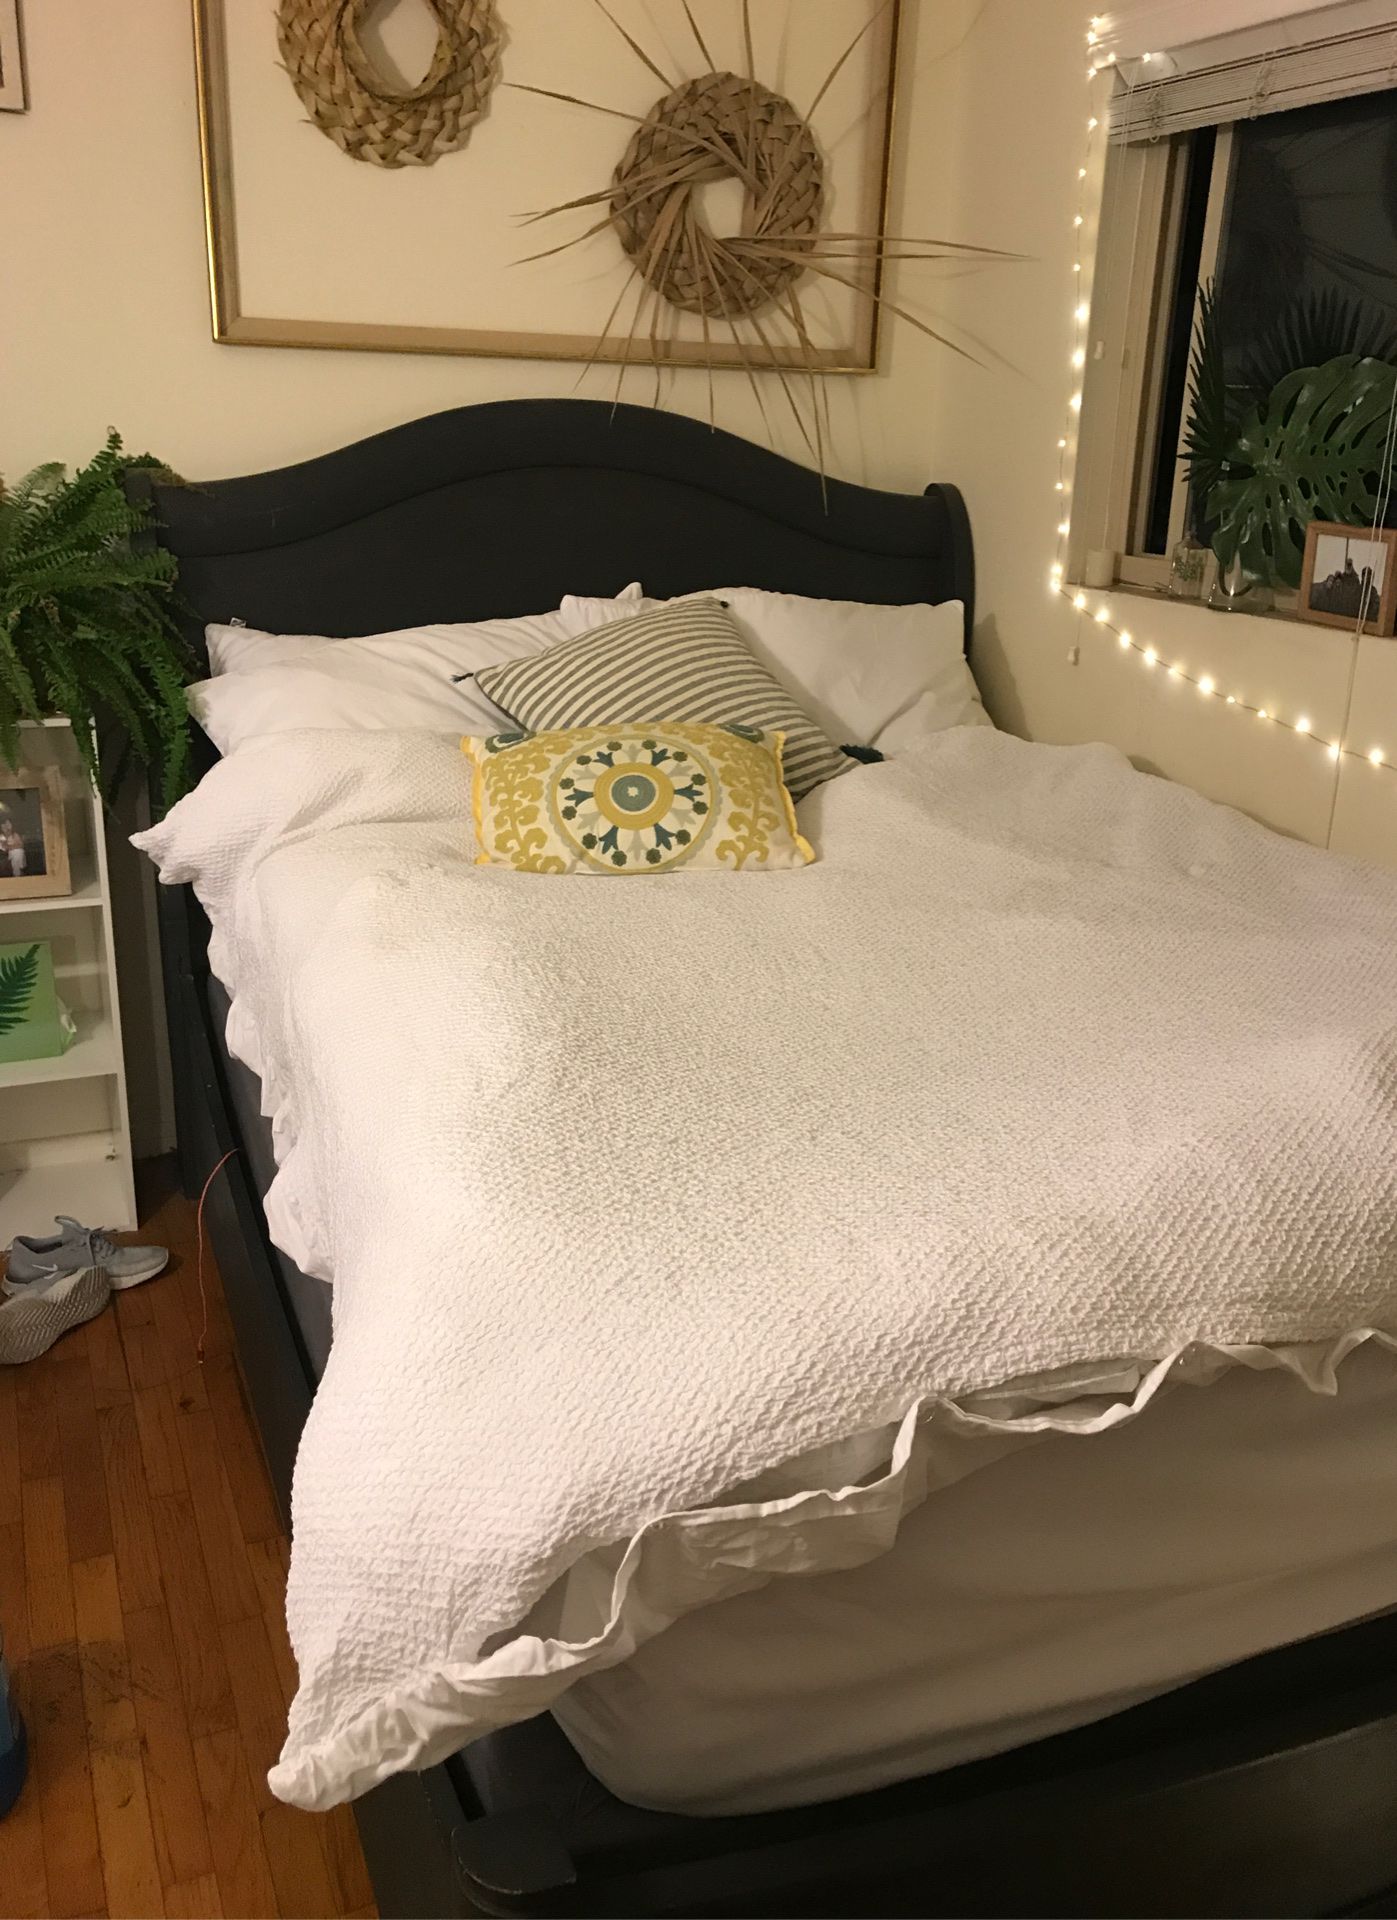 Queen size bed frame for sale